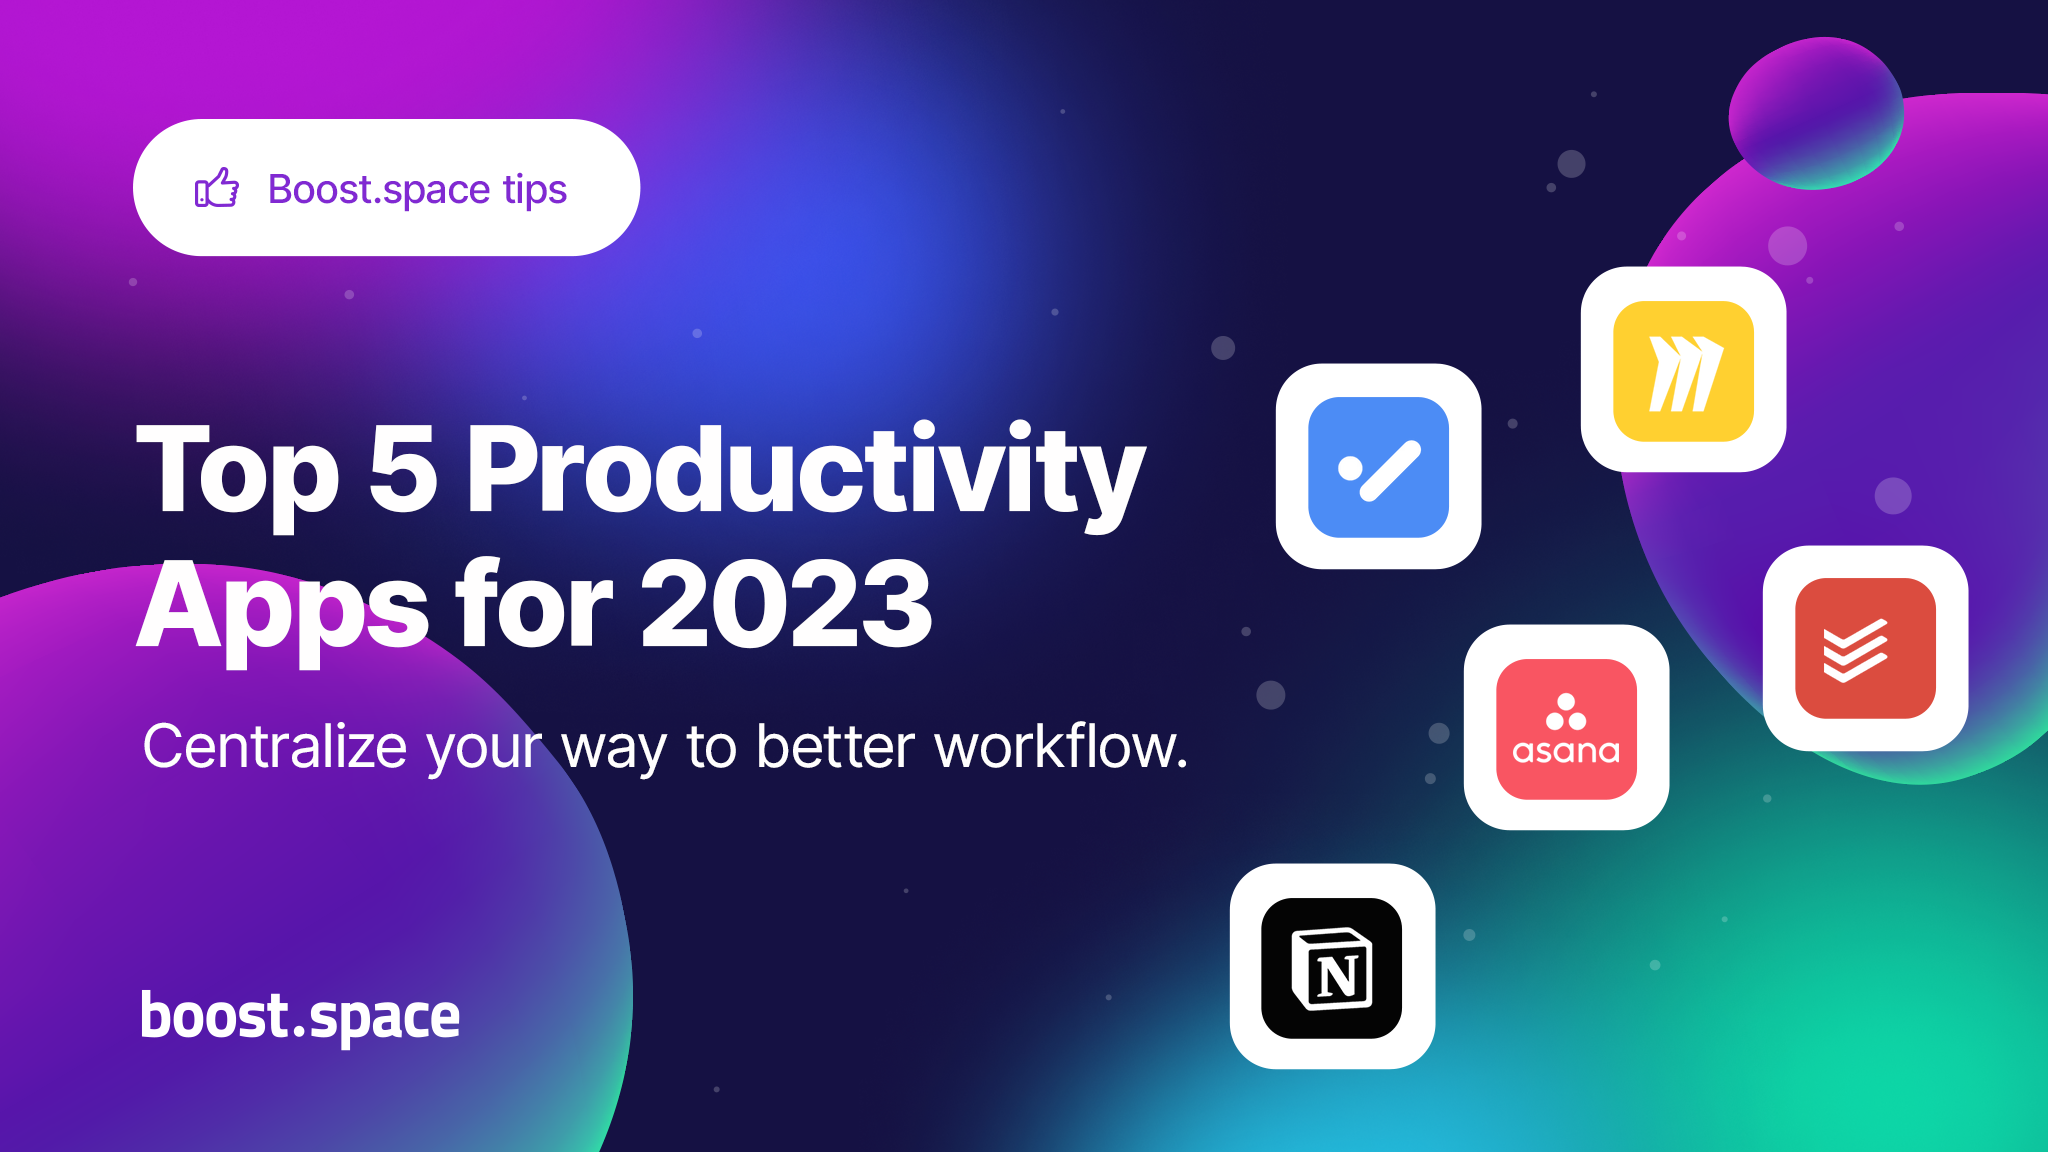 Top 5 to do apps for 2023